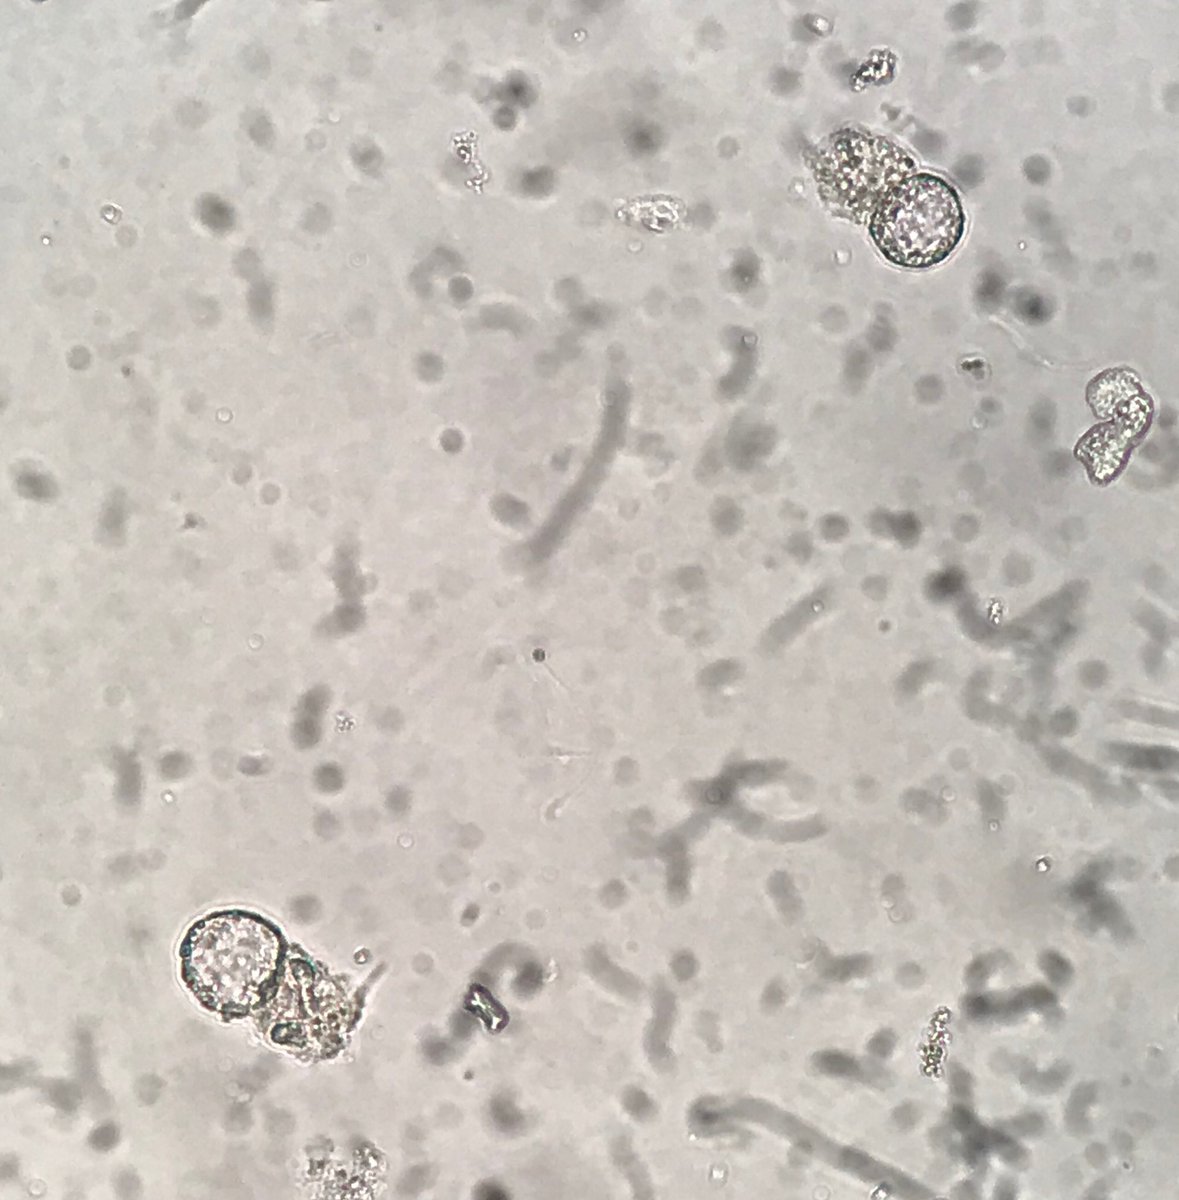 Decoy cells due to BK Polyomavirus in the urine of a kidney allograft recipient. Fresh and unstained urine sediment. Yes, we can correctly identify this kind of cell during routine urinalysis. #nephrology #kidneytransplantation #urinalysis #urinesediment